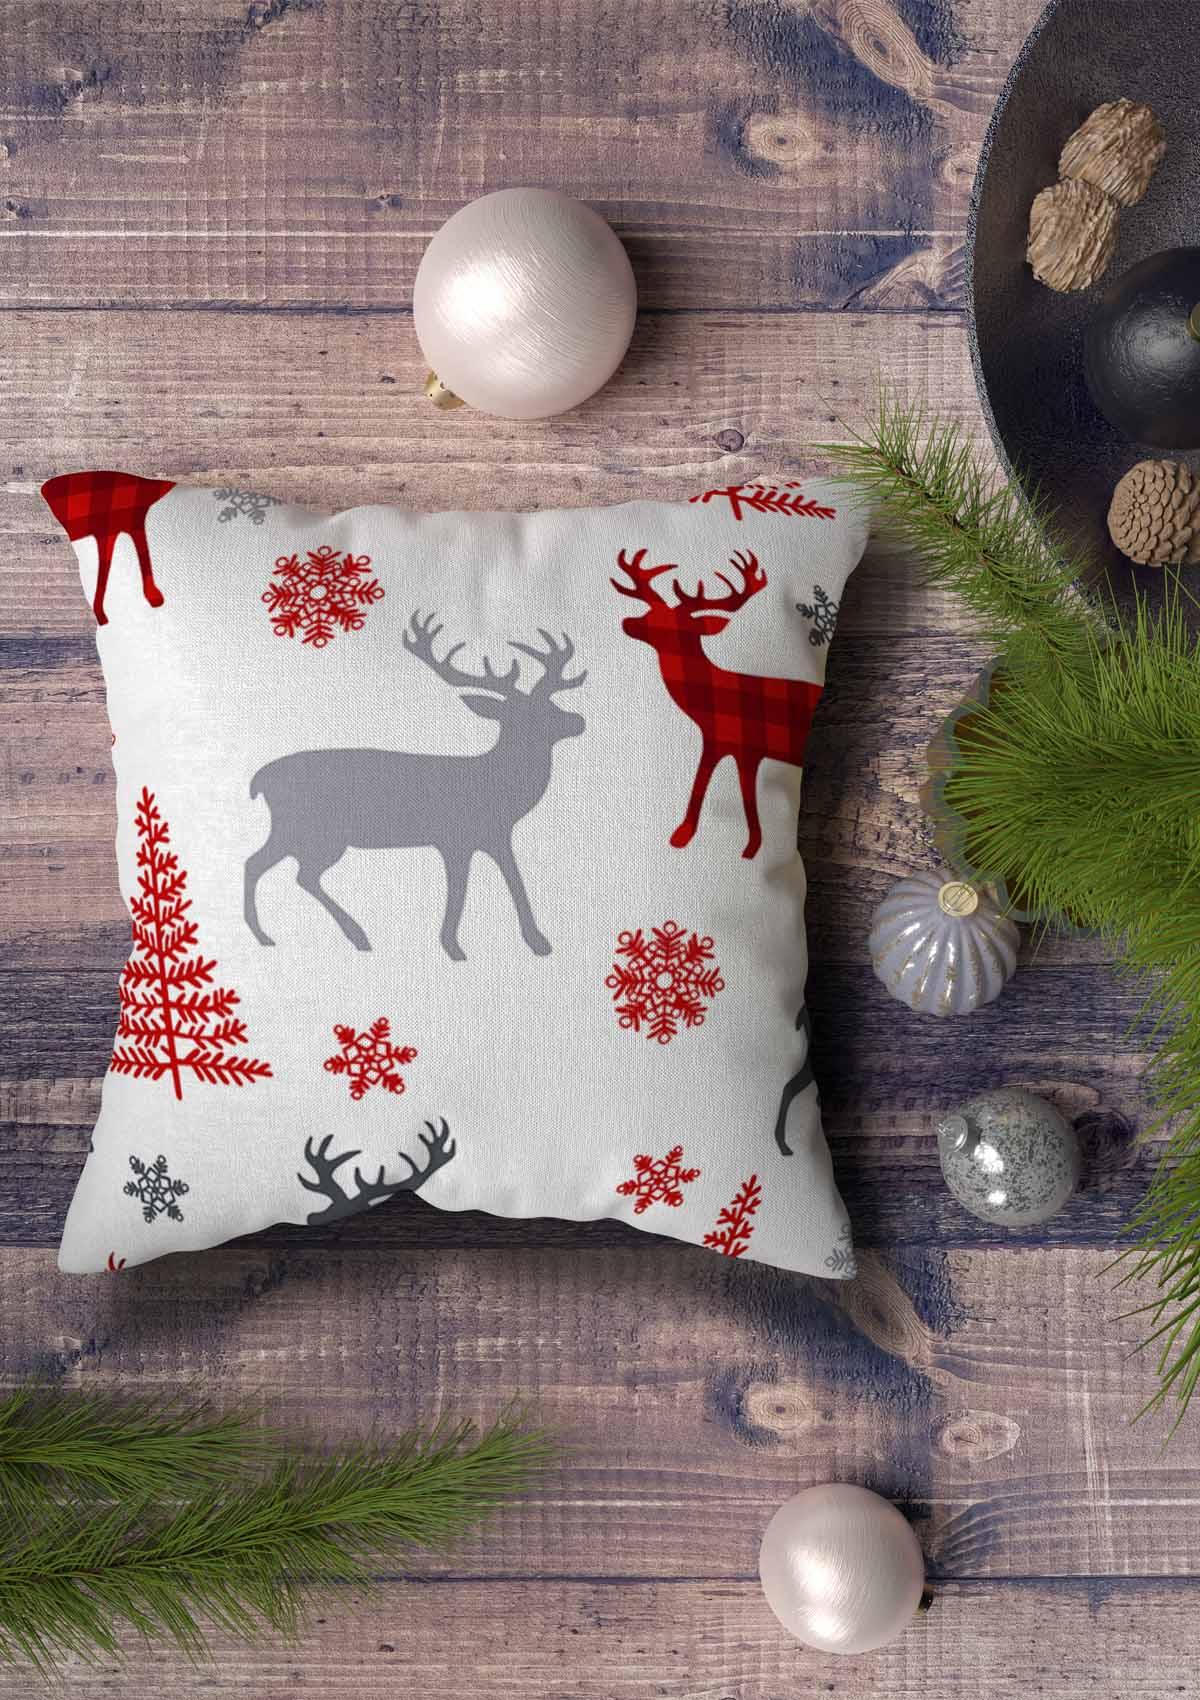 Christmas Cushion Covers 45x45 - Holiday-themed cushion covers in 45x45 size, perfect for festive home decor. Available in a variety of designs to elevate holiday atmosphere.